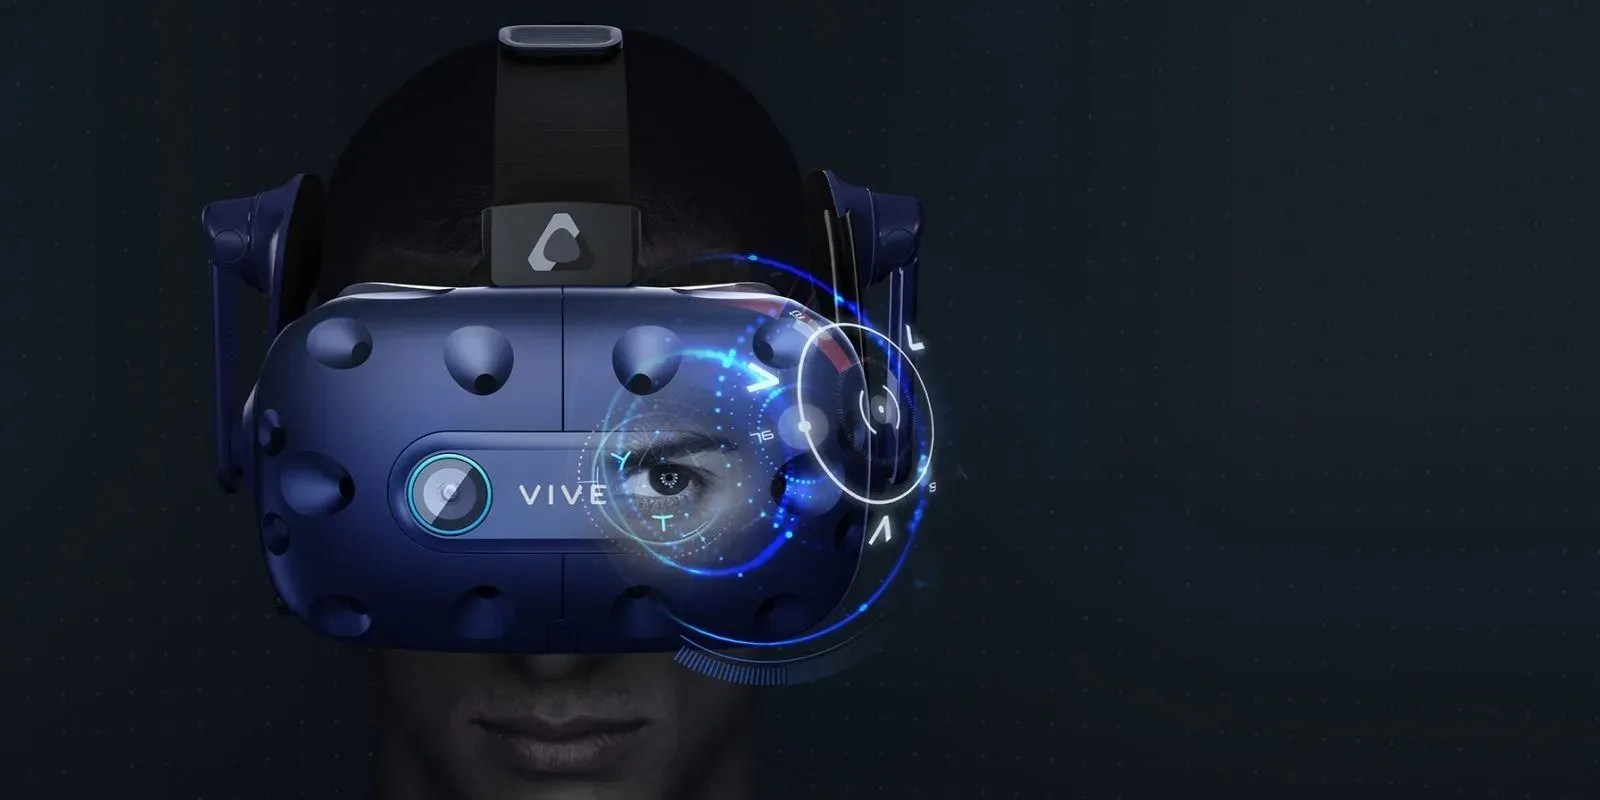 HTC Vive Pro Vs HTC Vive: All You Need to Know